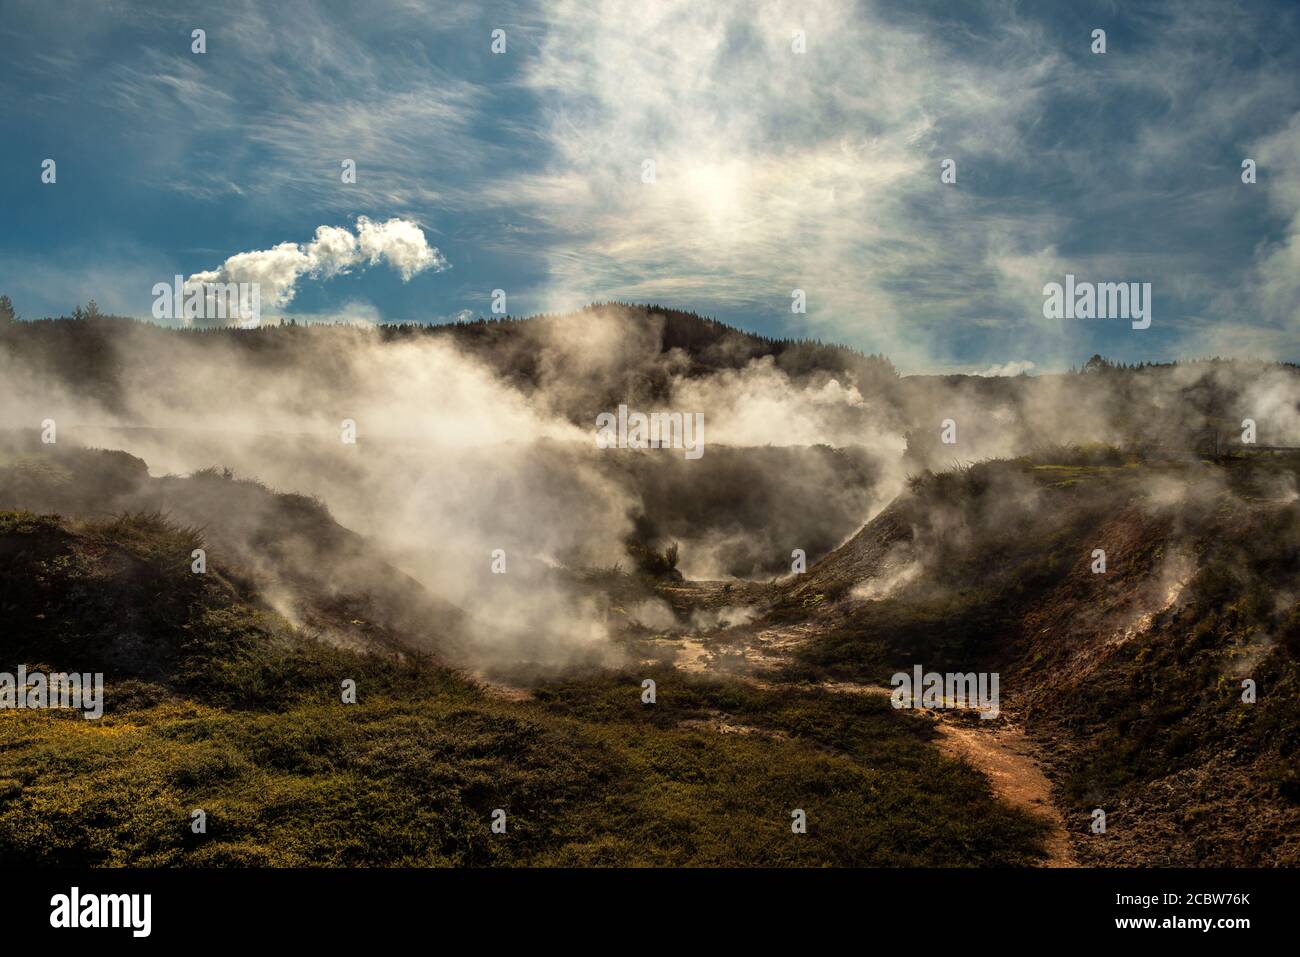 The geothermal fissures of the Craters of the Moon national park, near Lake Taupo in the north island of New Zealand. Stock Photo